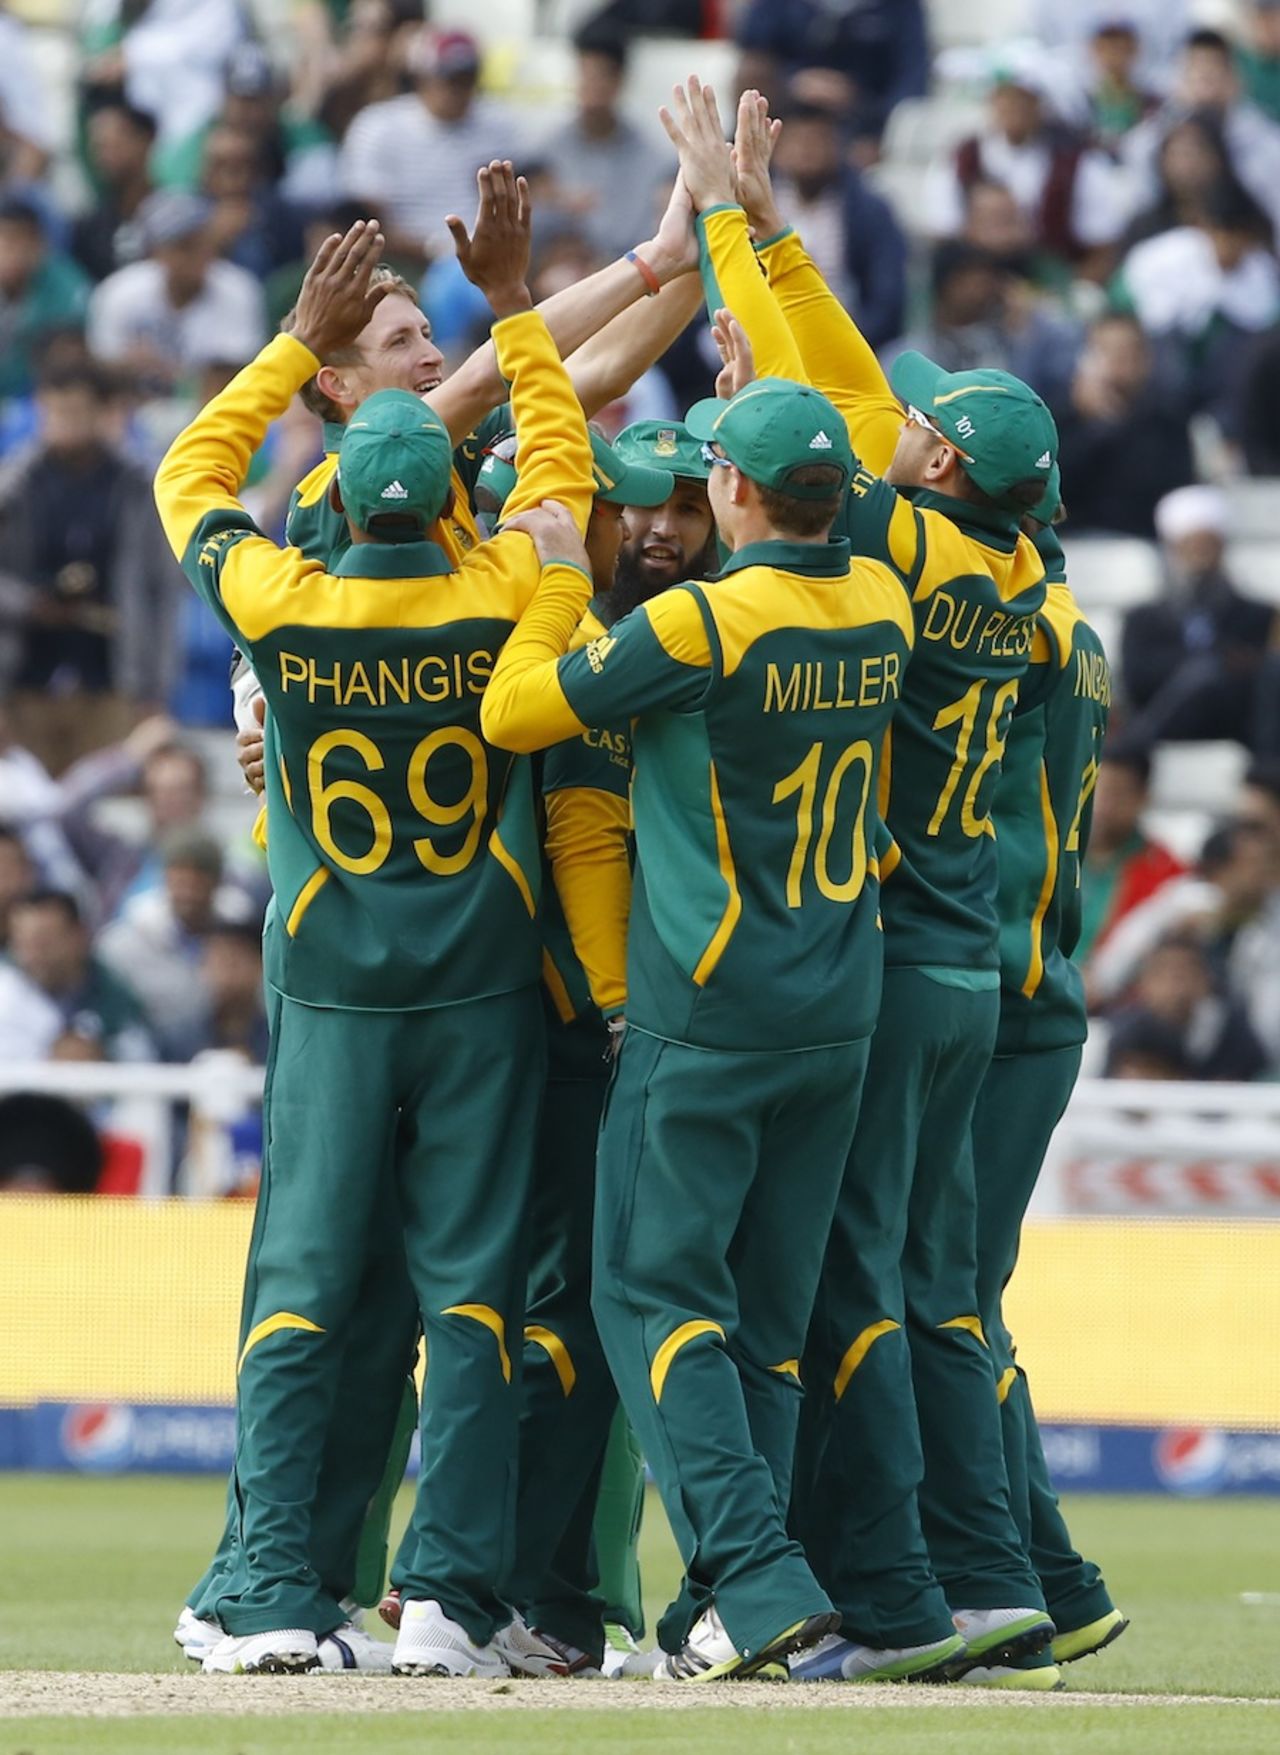 Chris Morris is congratulated after his first ODI wicket, Pakistan v South Africa, Champions Trophy, Group B, Edgbaston, June 10, 2013